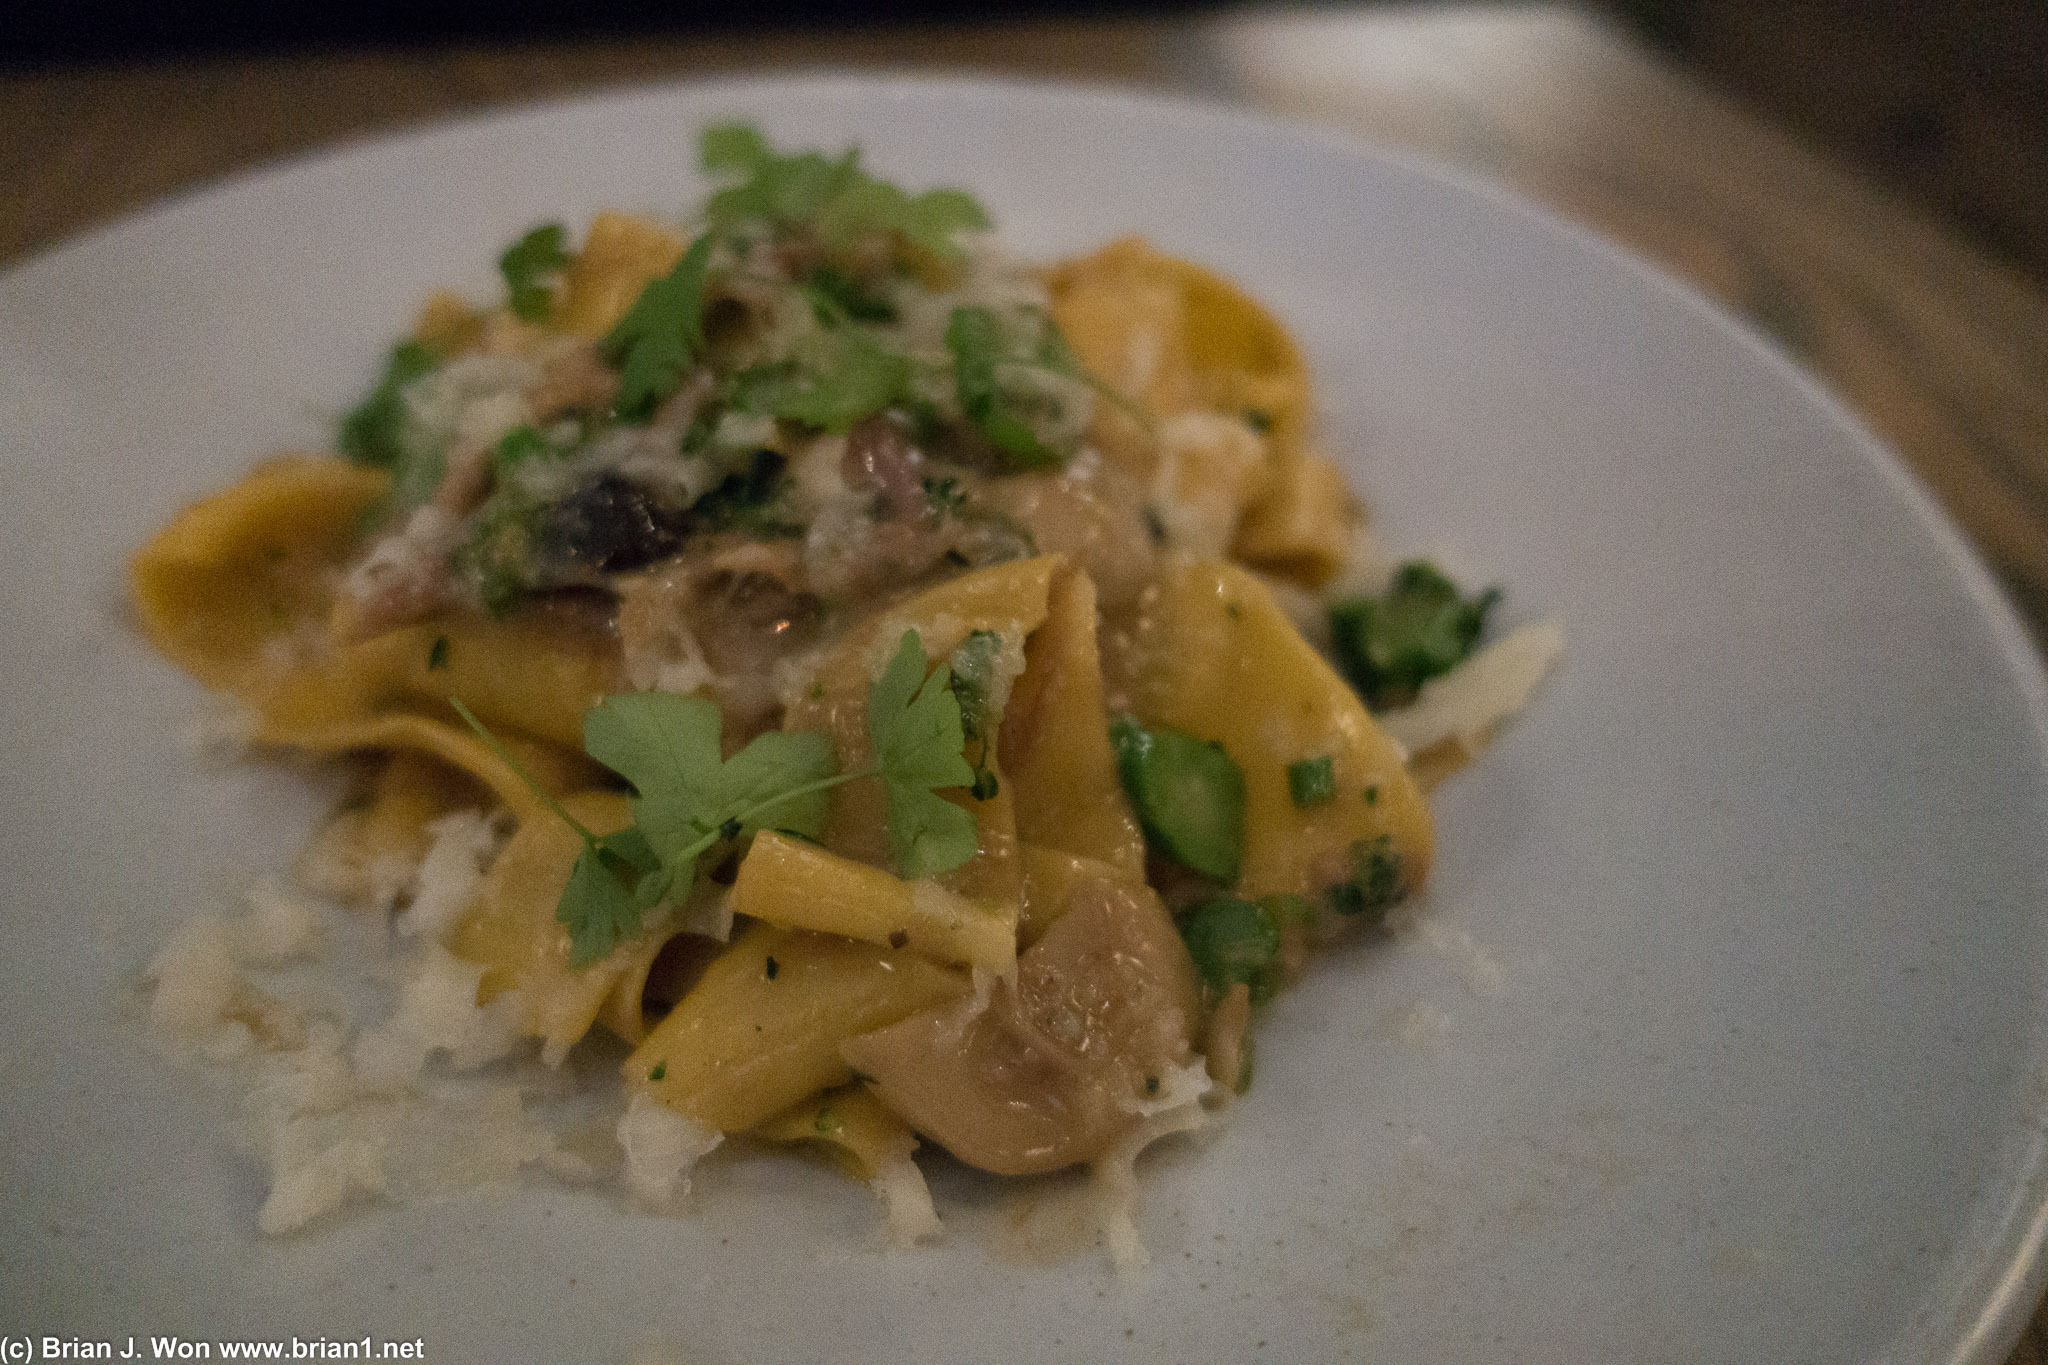 Pappardelle with duck confit. Fresh but otherwise average.